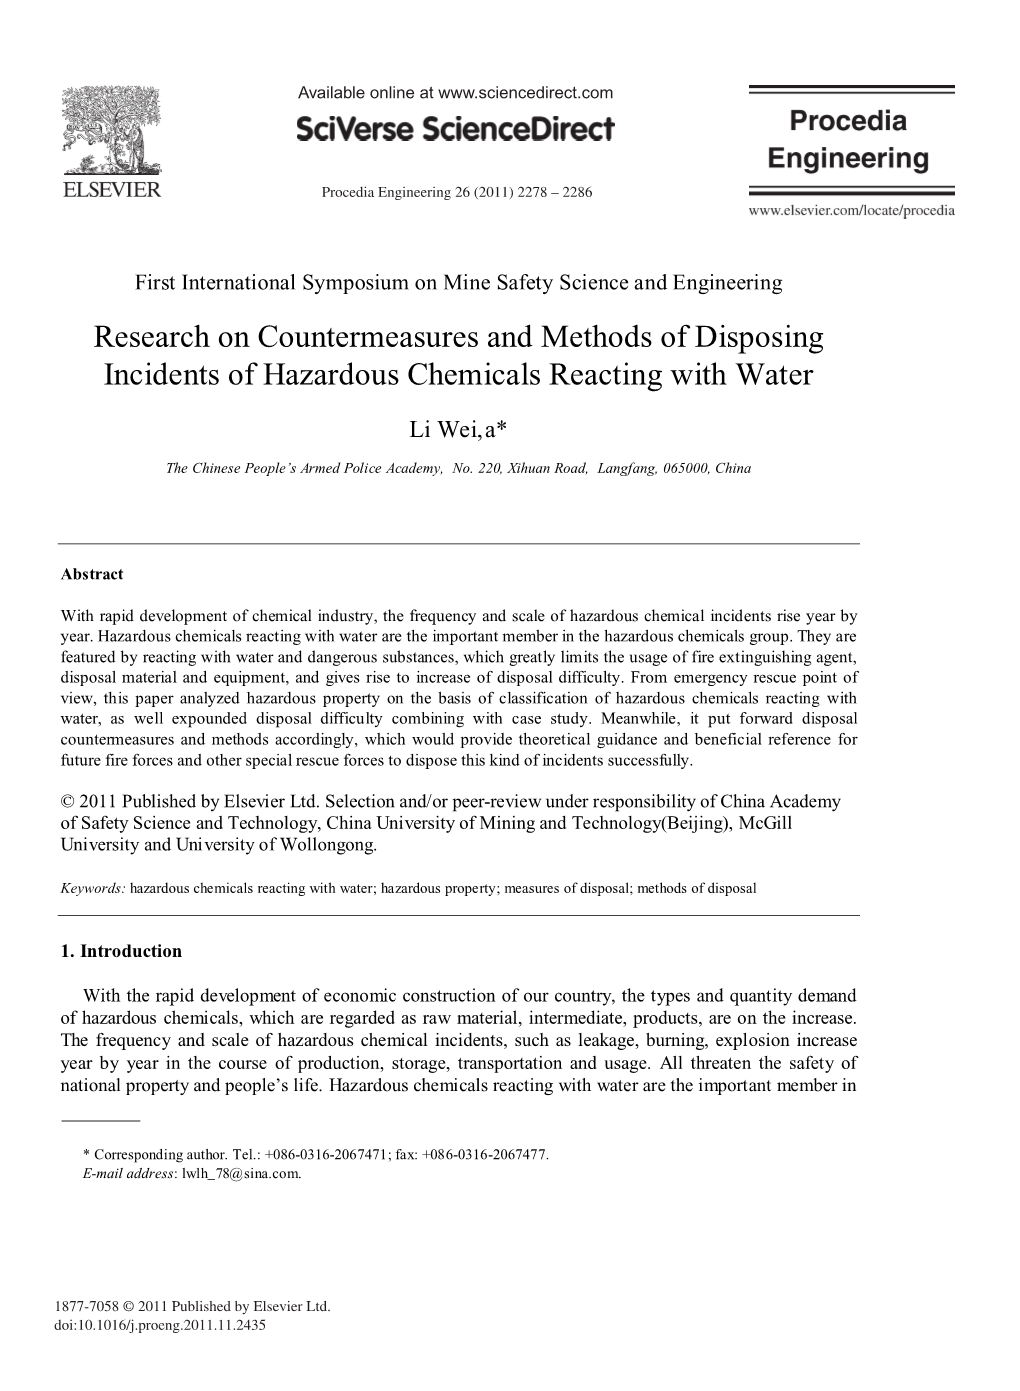 Research on Countermeasures and Methods of Disposing Incidents of Hazardous Chemicals Reacting with Water